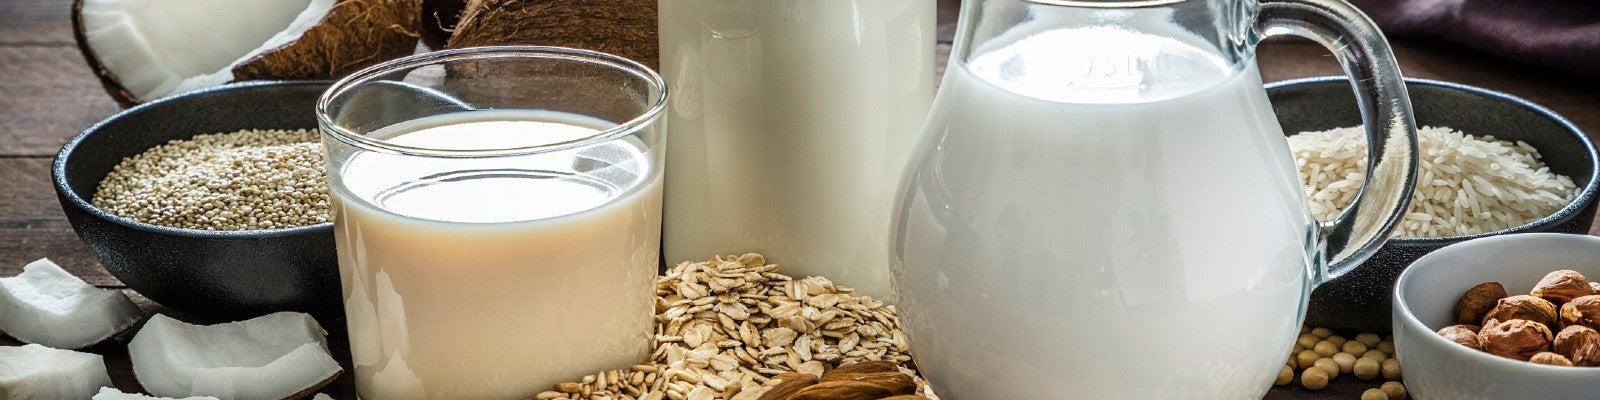 Raw ingredients and alternatives to dairy milk